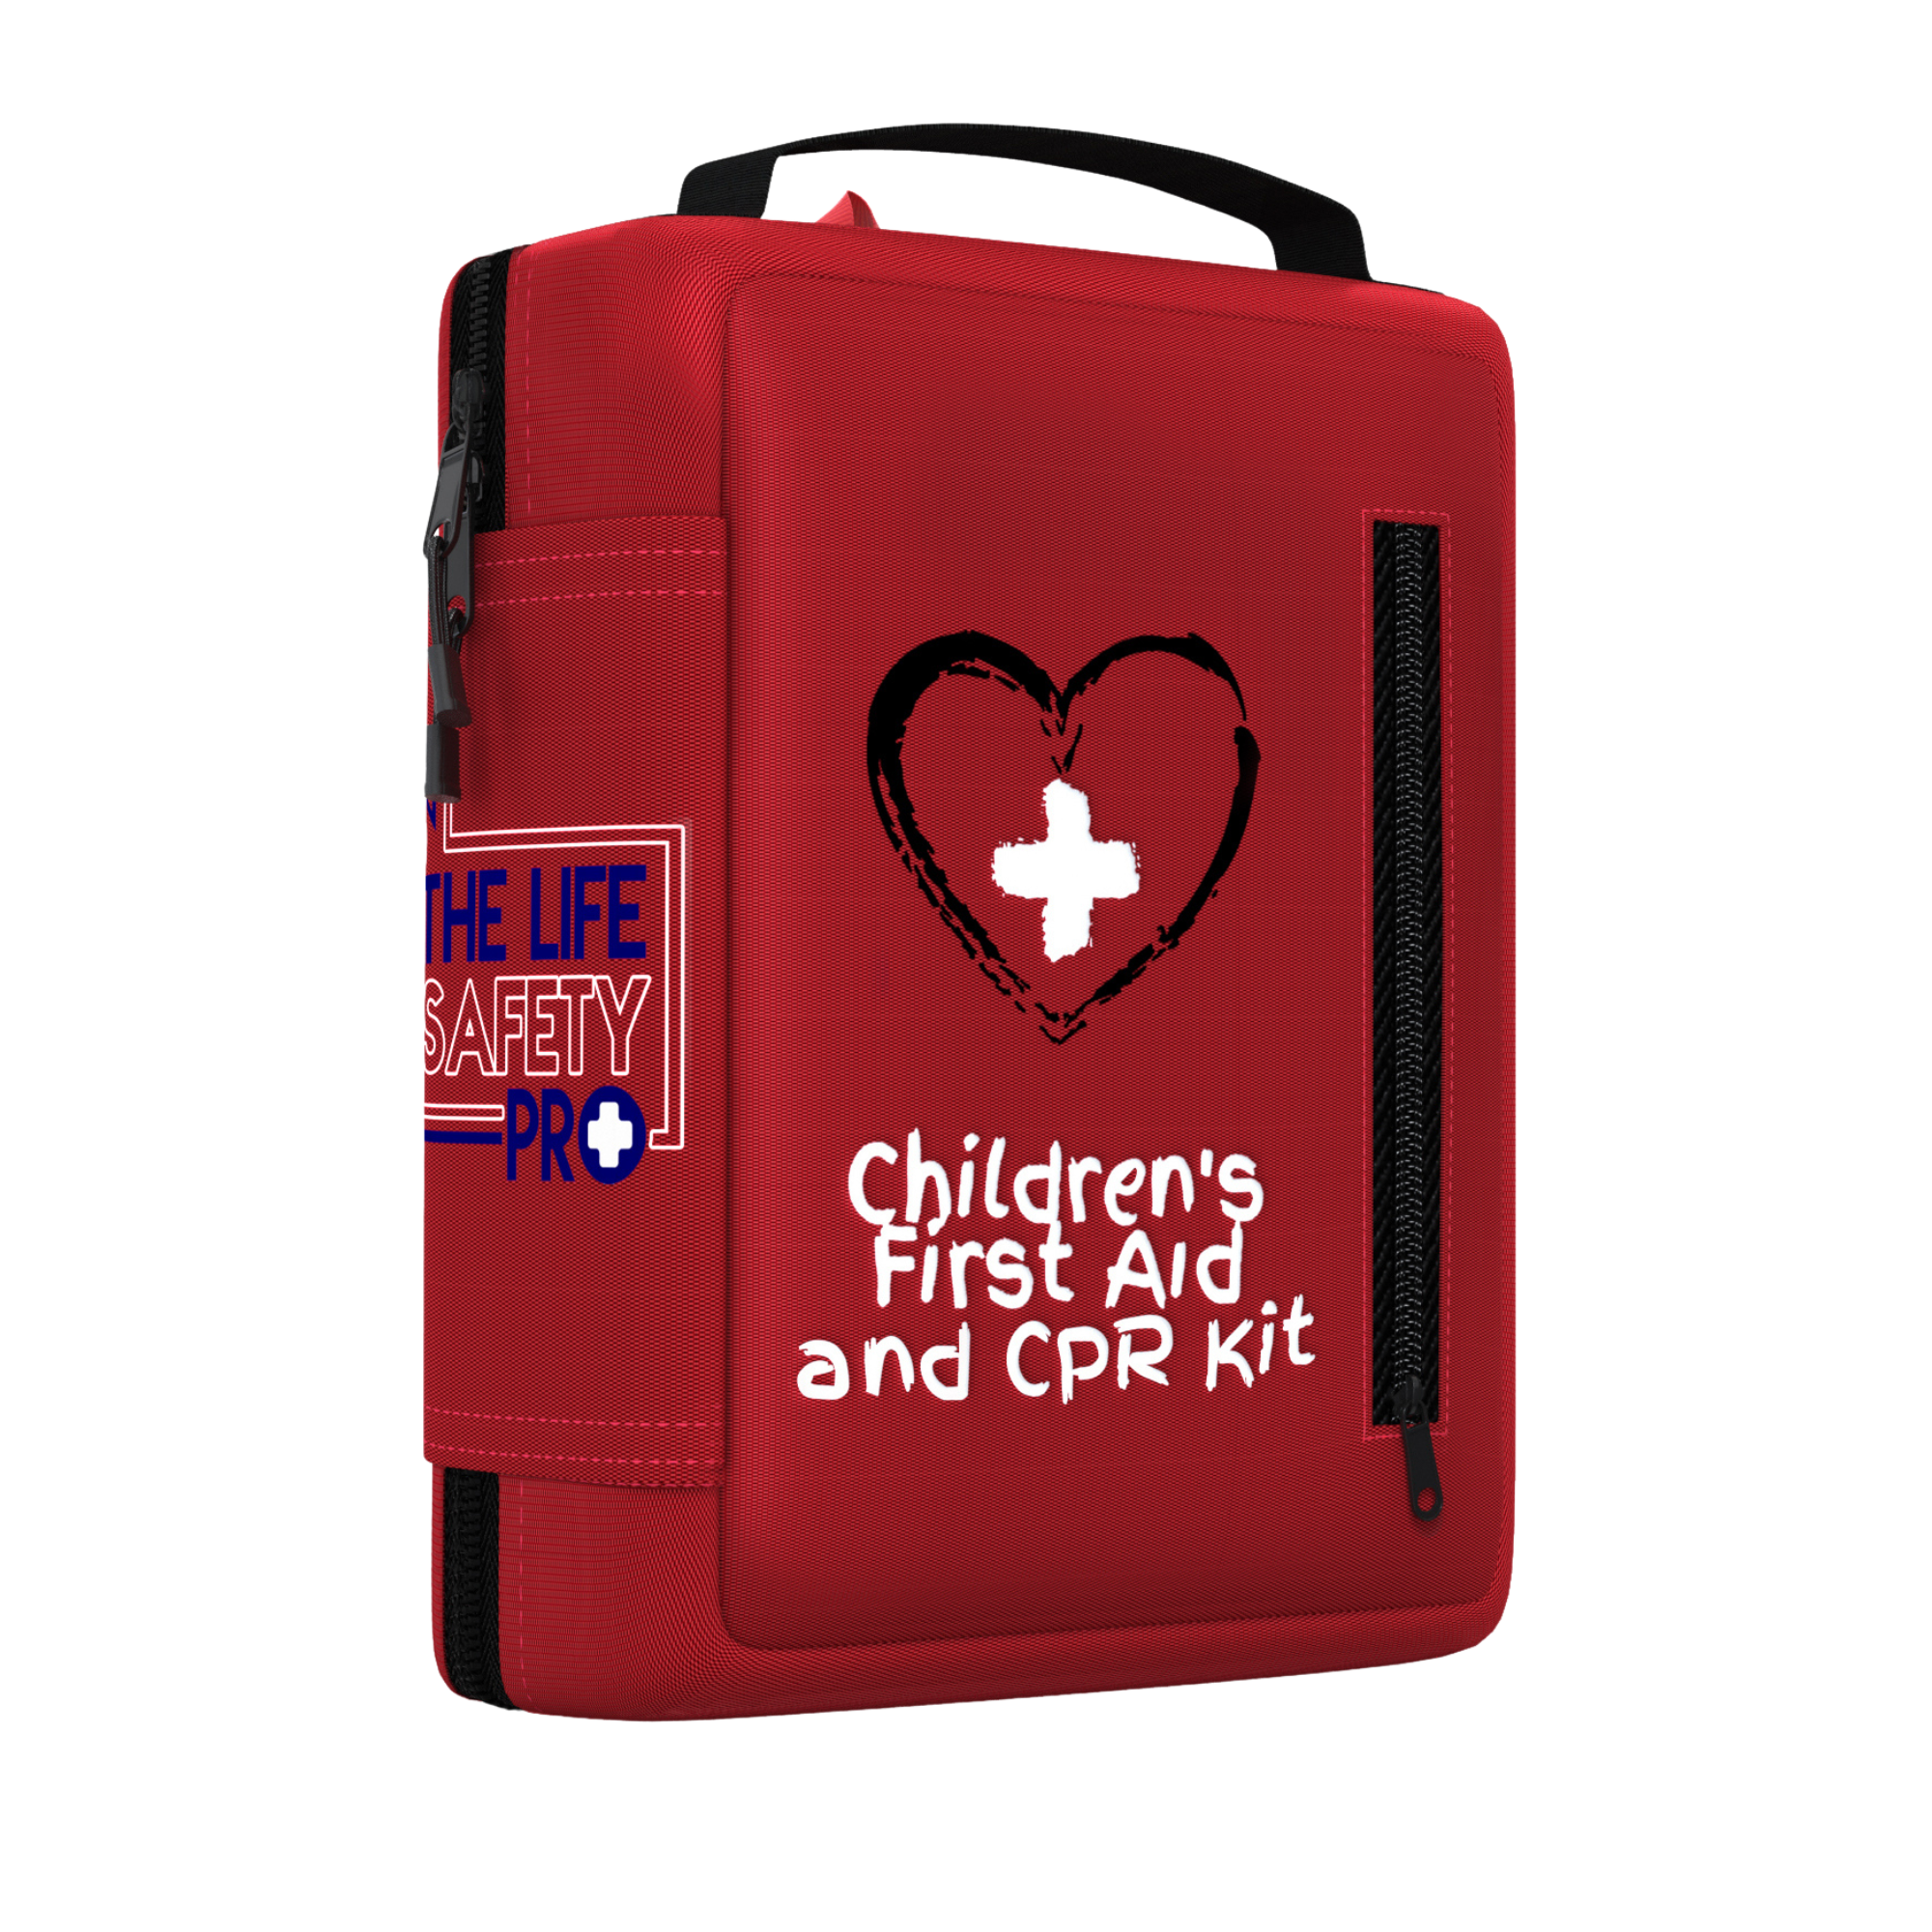 Children's First Aid and CPR Kit from the Life Safety Pro